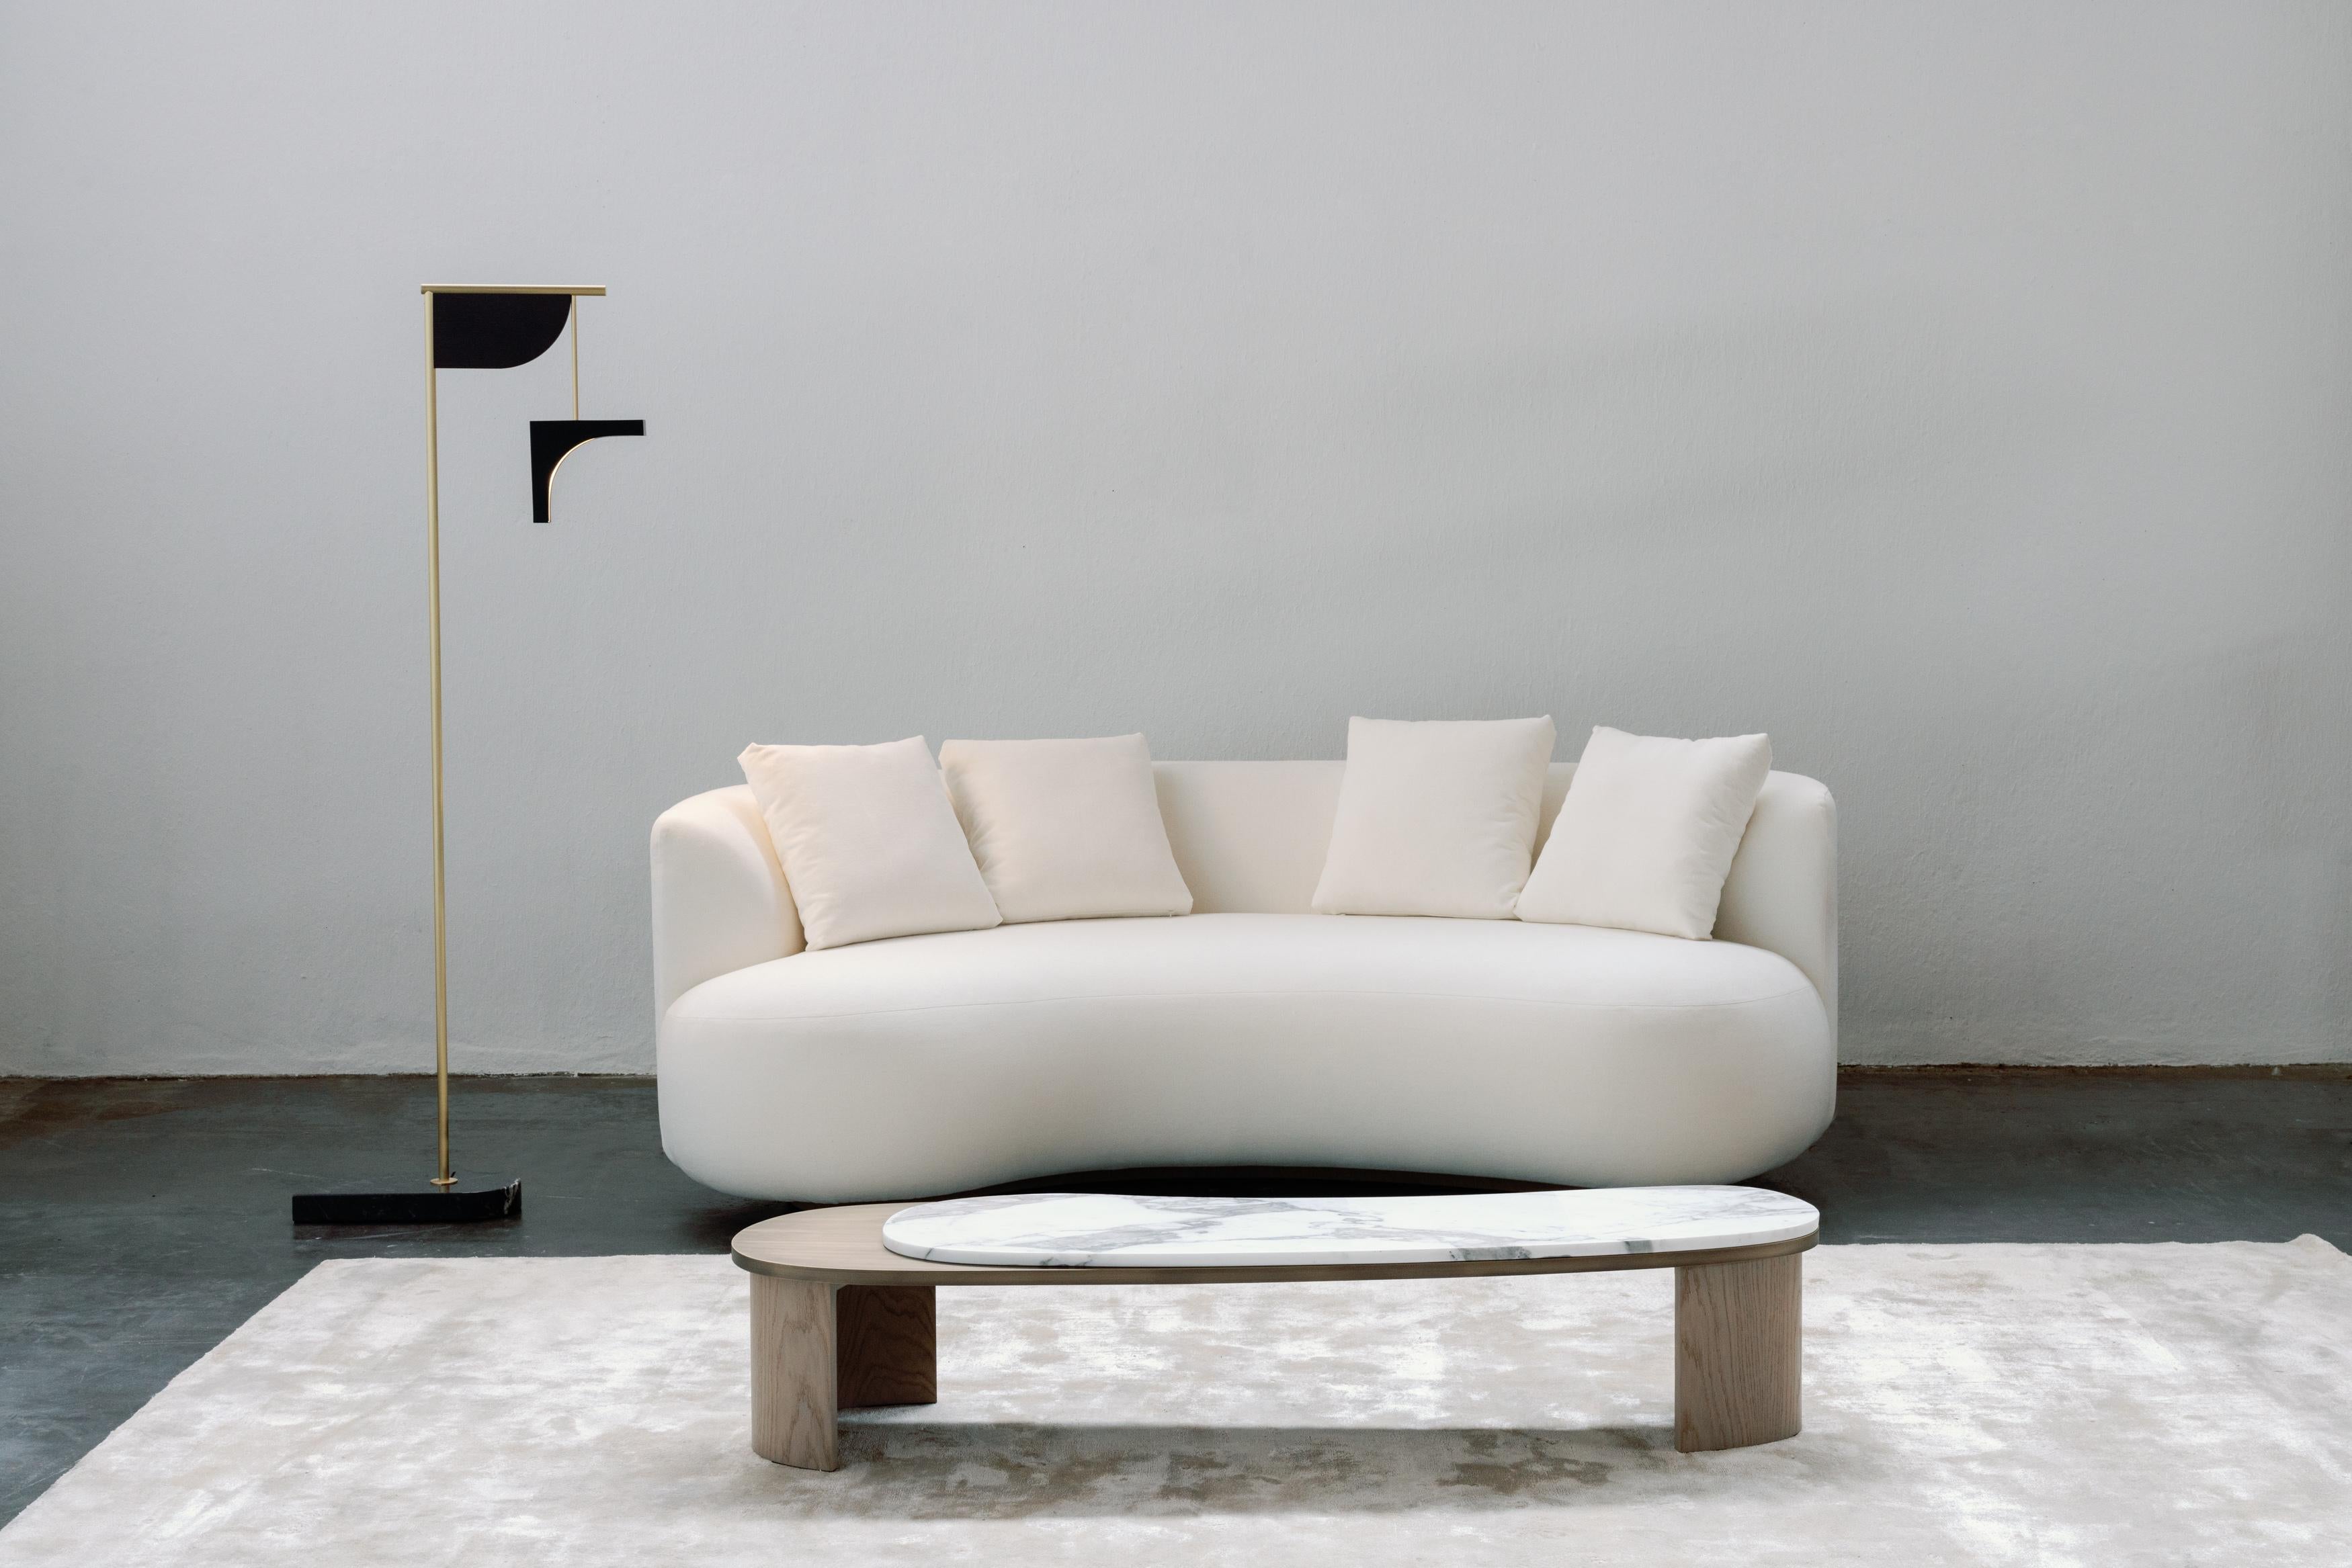 Armona coffee table, Contemporary Collection, Handcrafted in Portugal - Europe by Greenapple.

Designed by Rute Martins for the Contemporary Collection, by using high quality materials and textures Armona is an elegant coffee table that captures